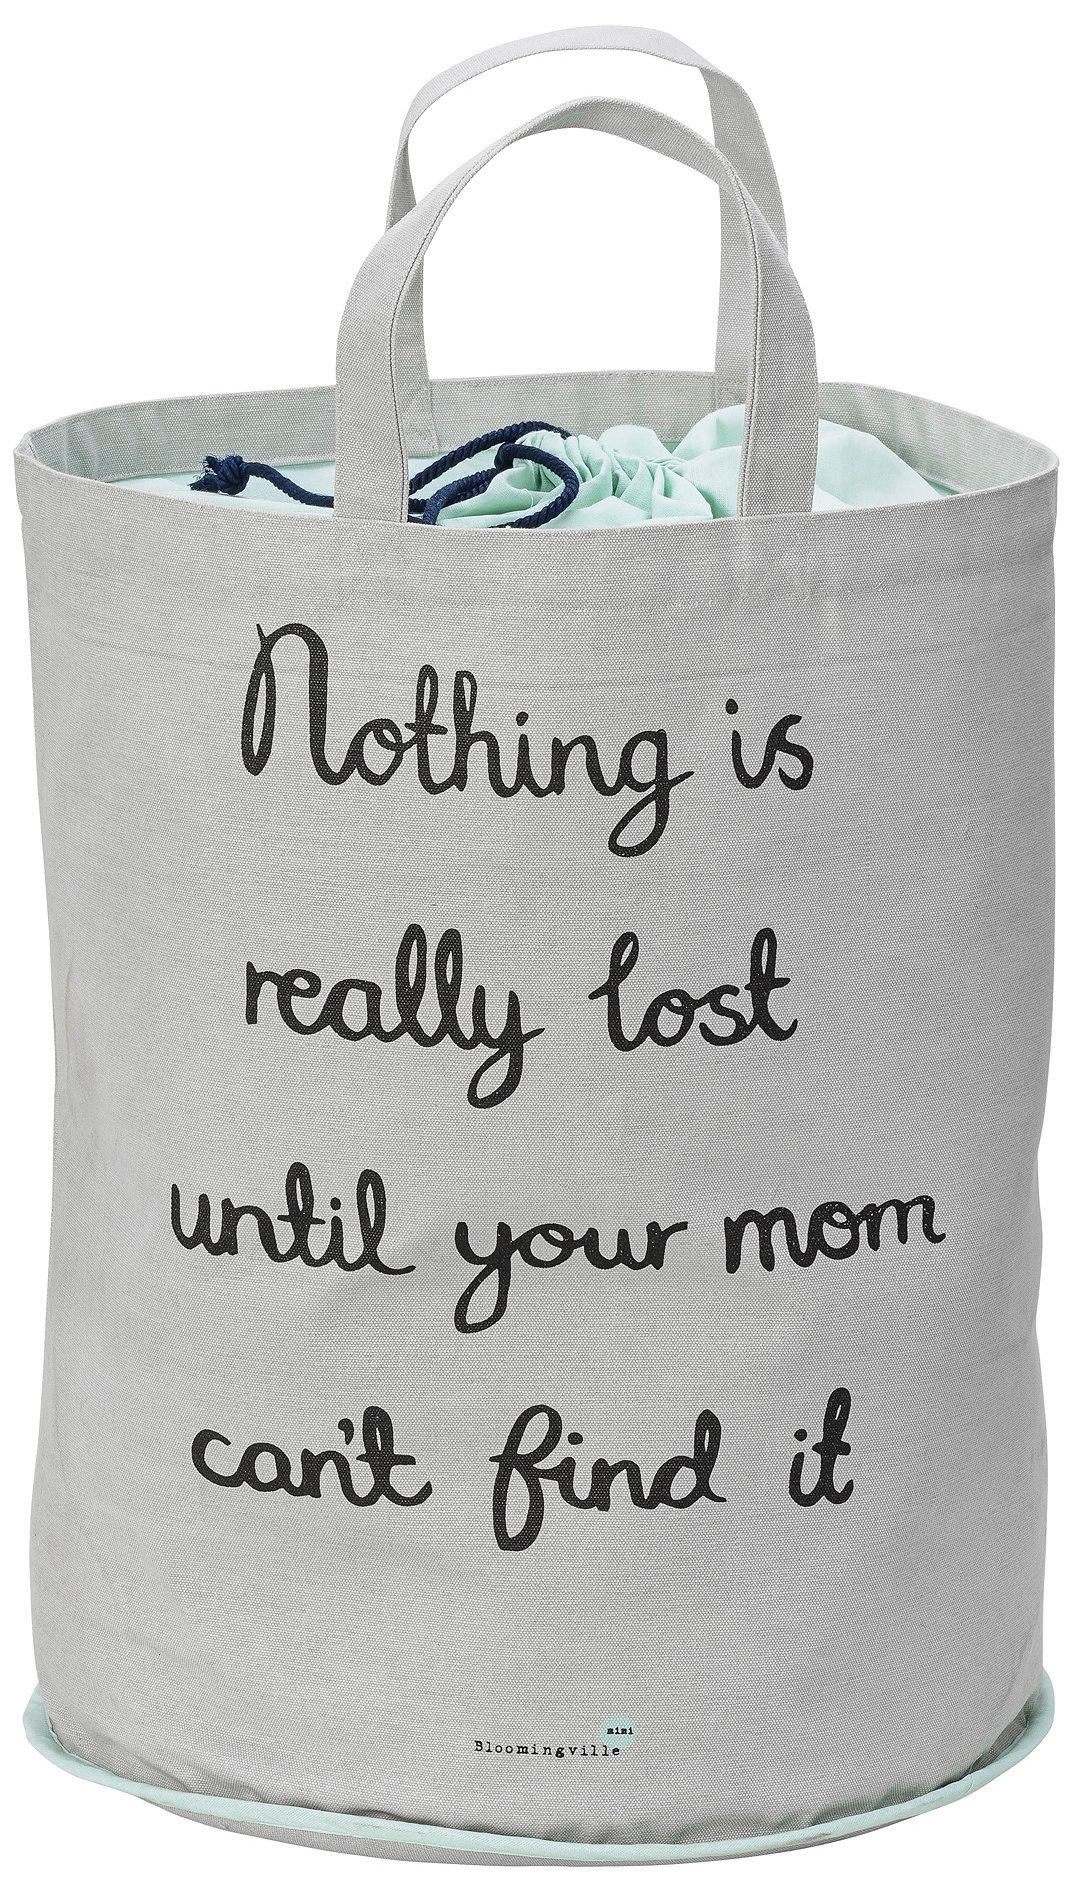 Aufbewahrungssack "Nothing is really lost until your mom can't find it"